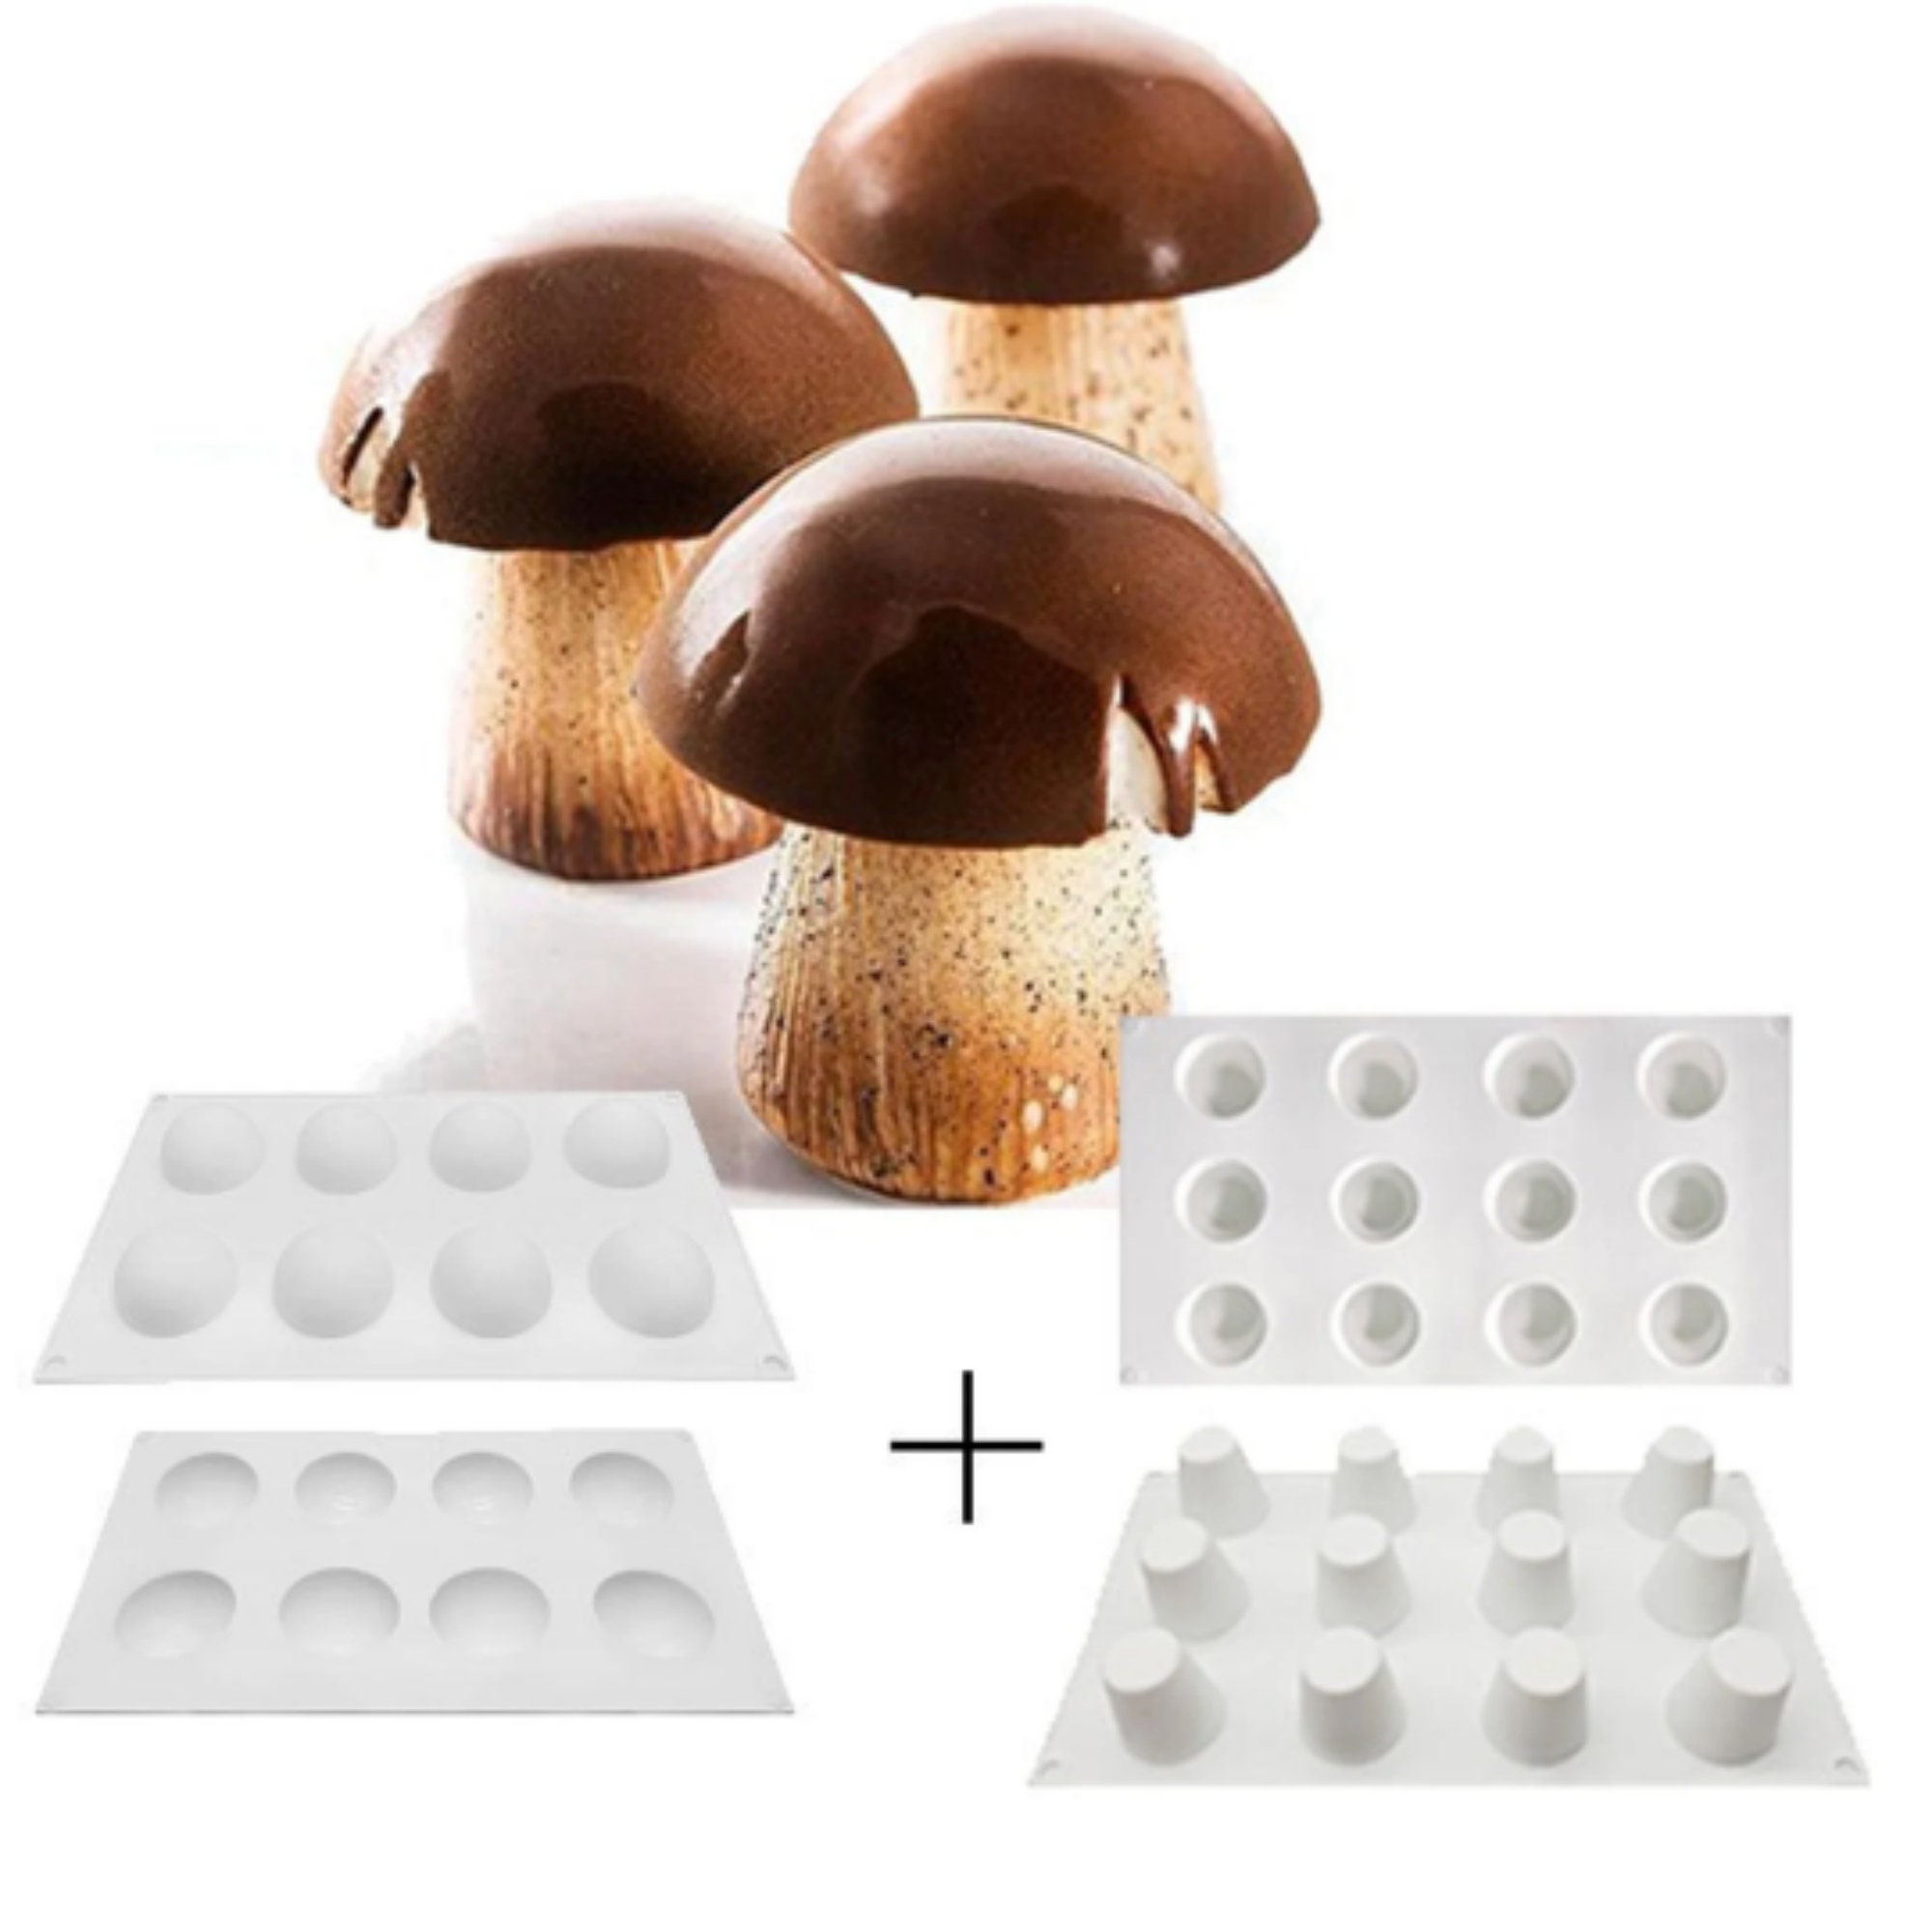 3D Mushrooms Clear Silicone Mold for Cake Decorating, Sugarcraft,  Chocolate, Fondant 